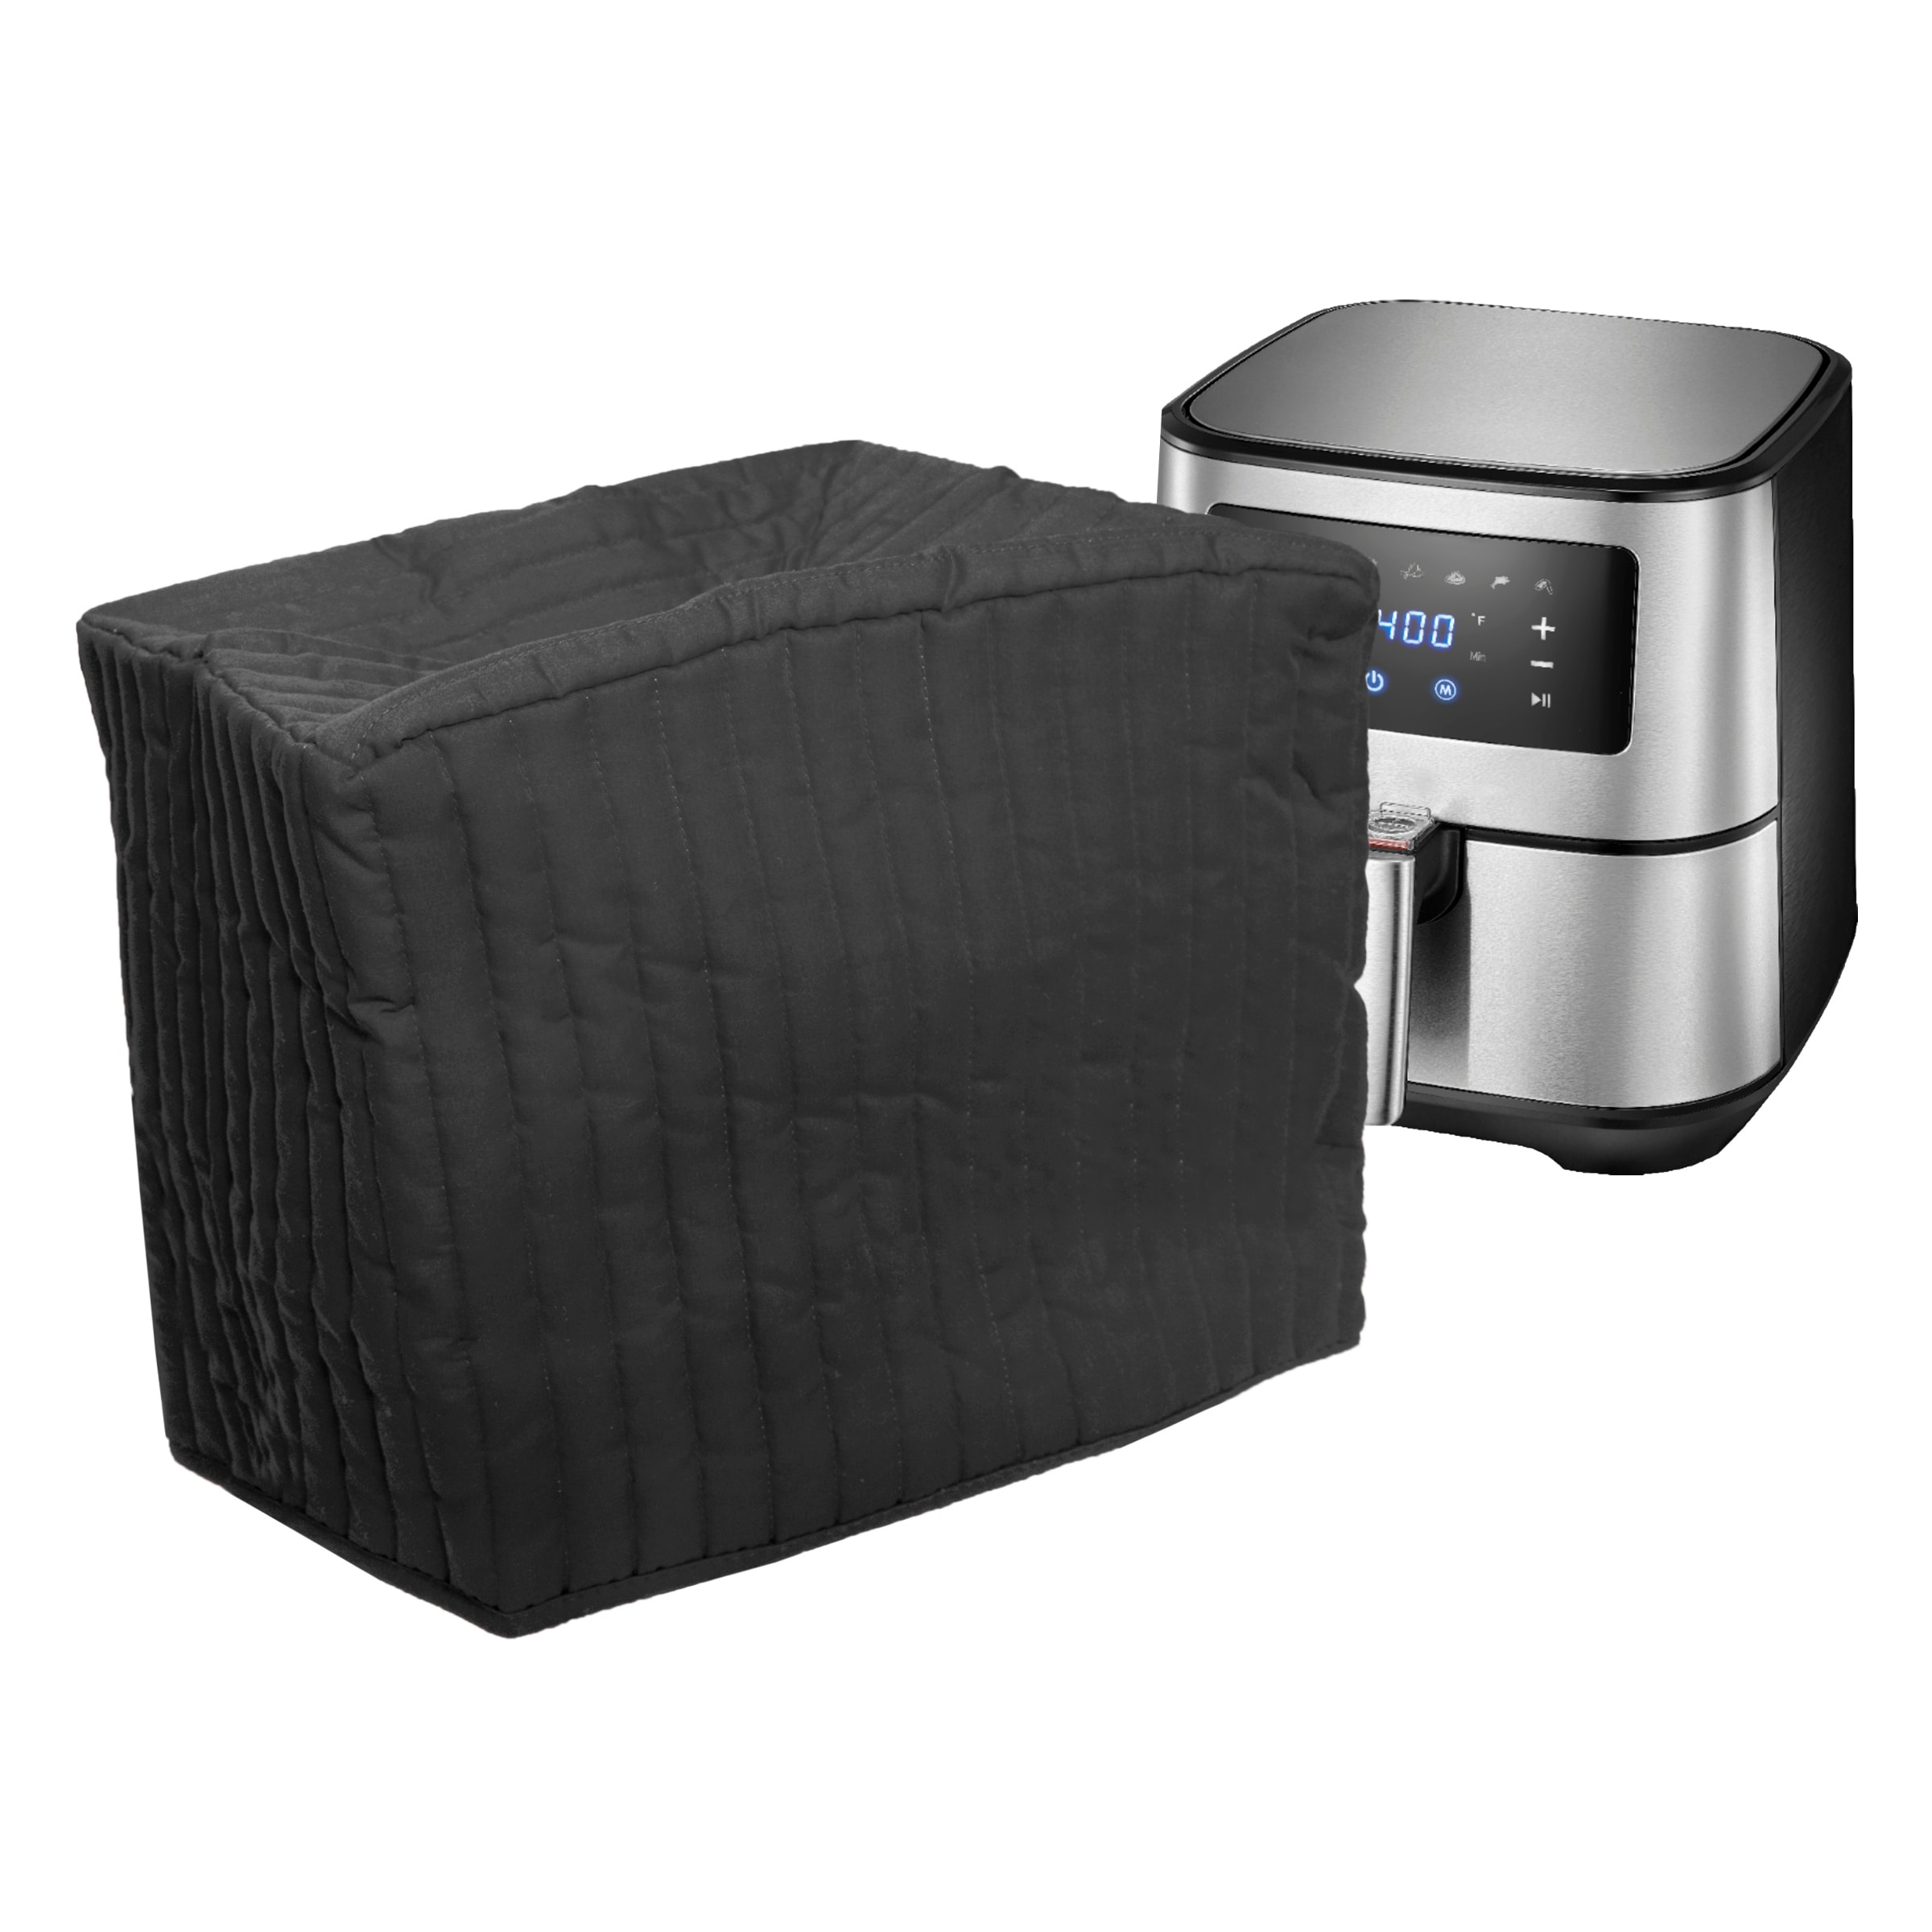 https://ak1.ostkcdn.com/images/products/is/images/direct/f80bcd61794b0c750f027ecea60cfca89fee1851/Solid-Black-5-Quart-Air-Fryer-Appliance-Cover%2C-Appliance-Not-Included.jpg